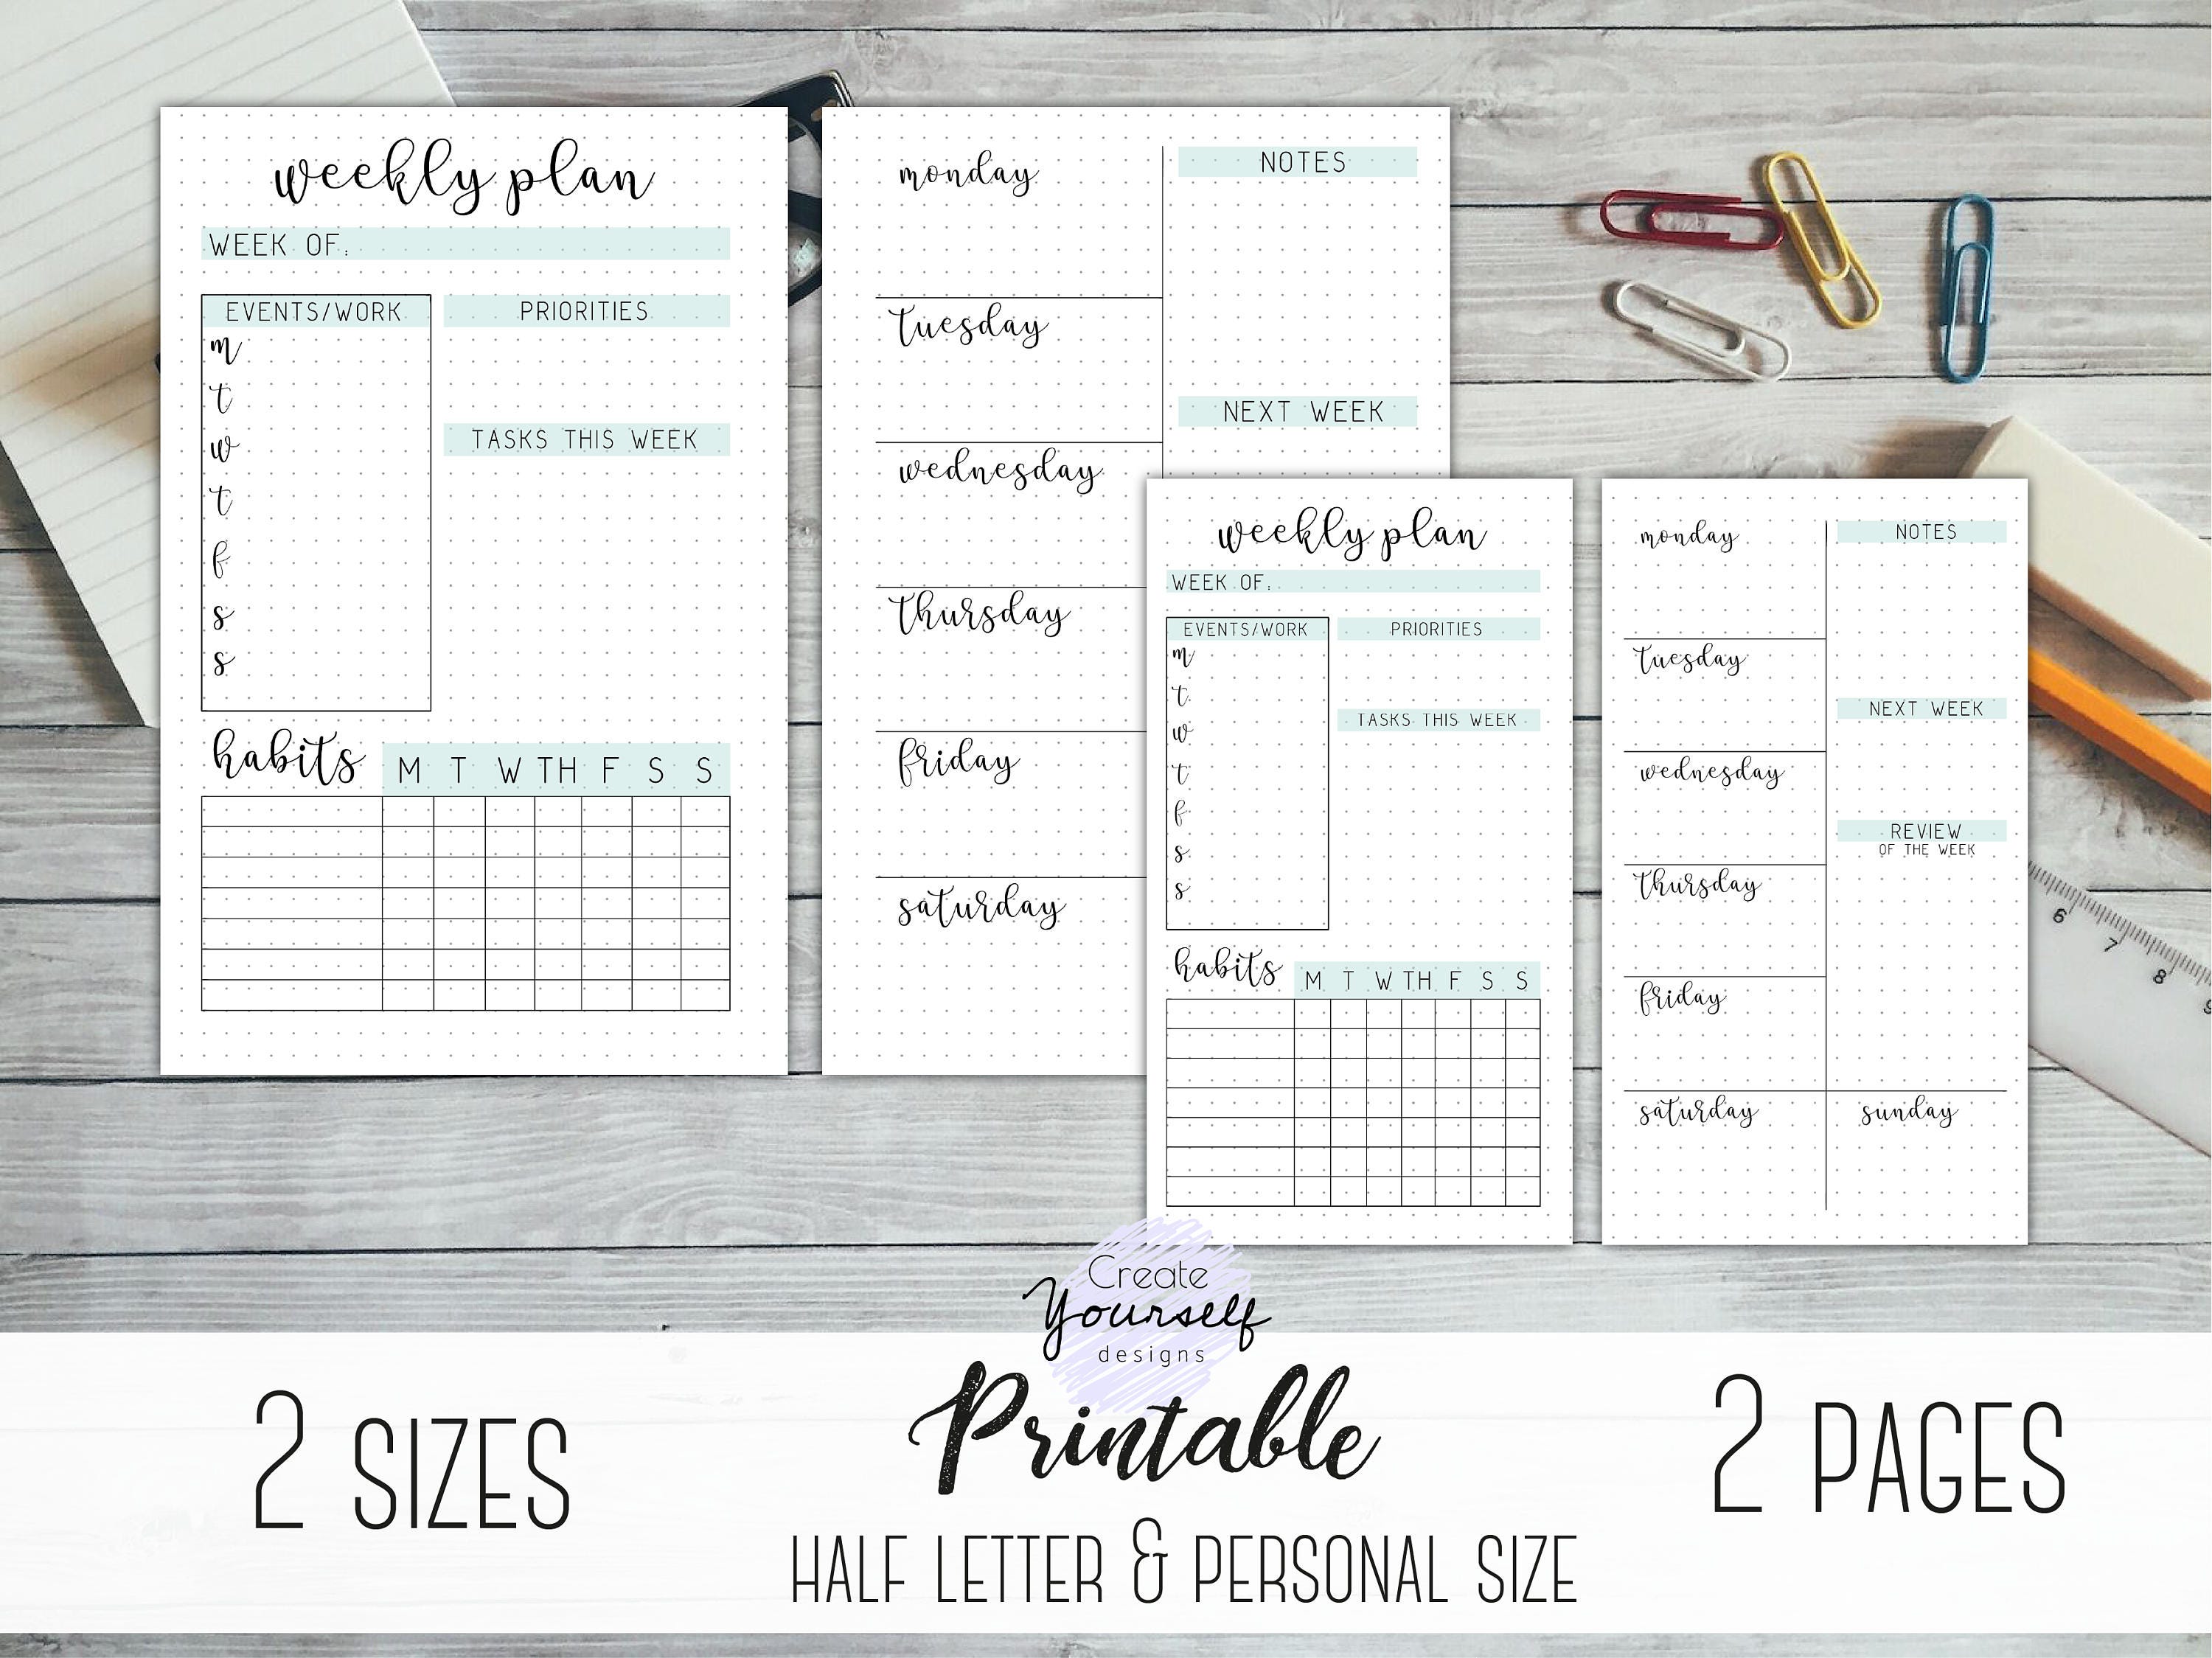 Deluxe Grid Journal Kit Planner Inserts Dot Journal Daily Agenda Weekly  Schedule Monthly Calendar Instant Download PDF 